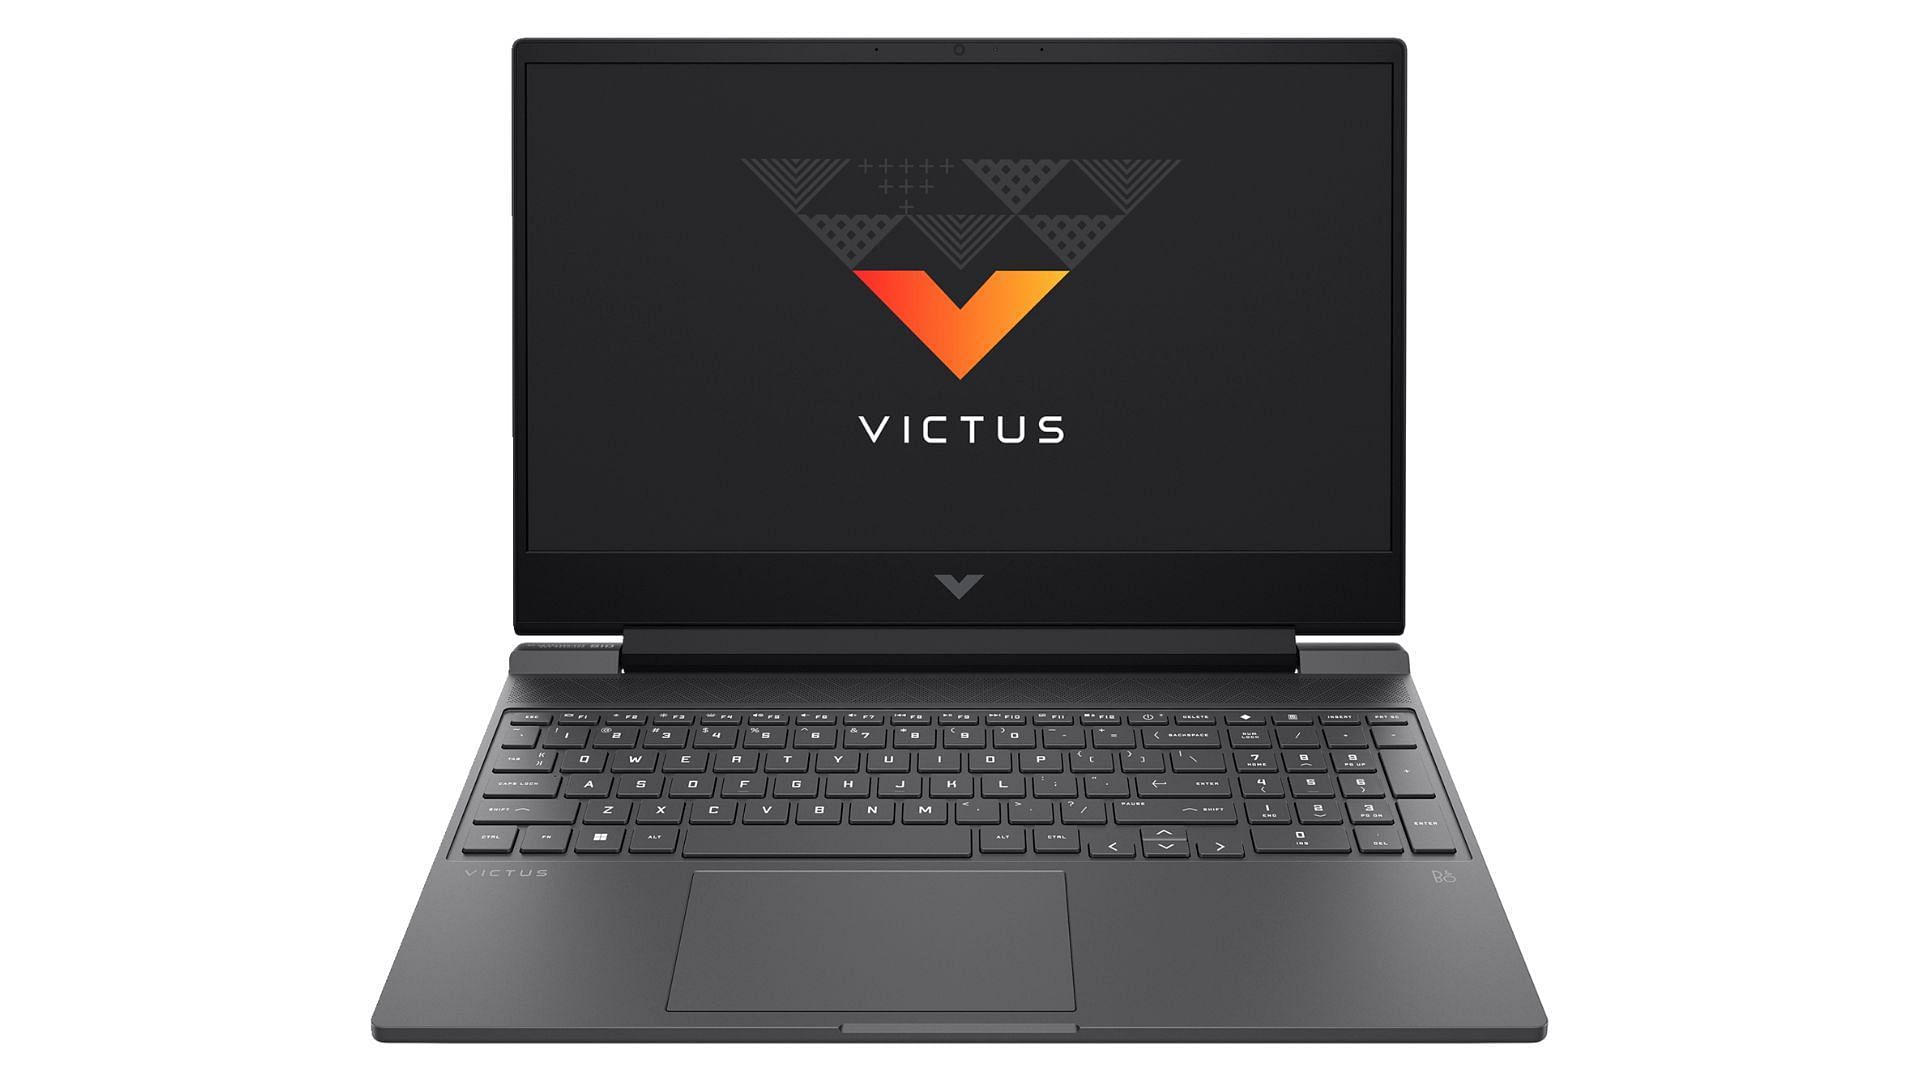 The HP Victus 15 is among the best 15-inch gaming laptops (Image via HP)